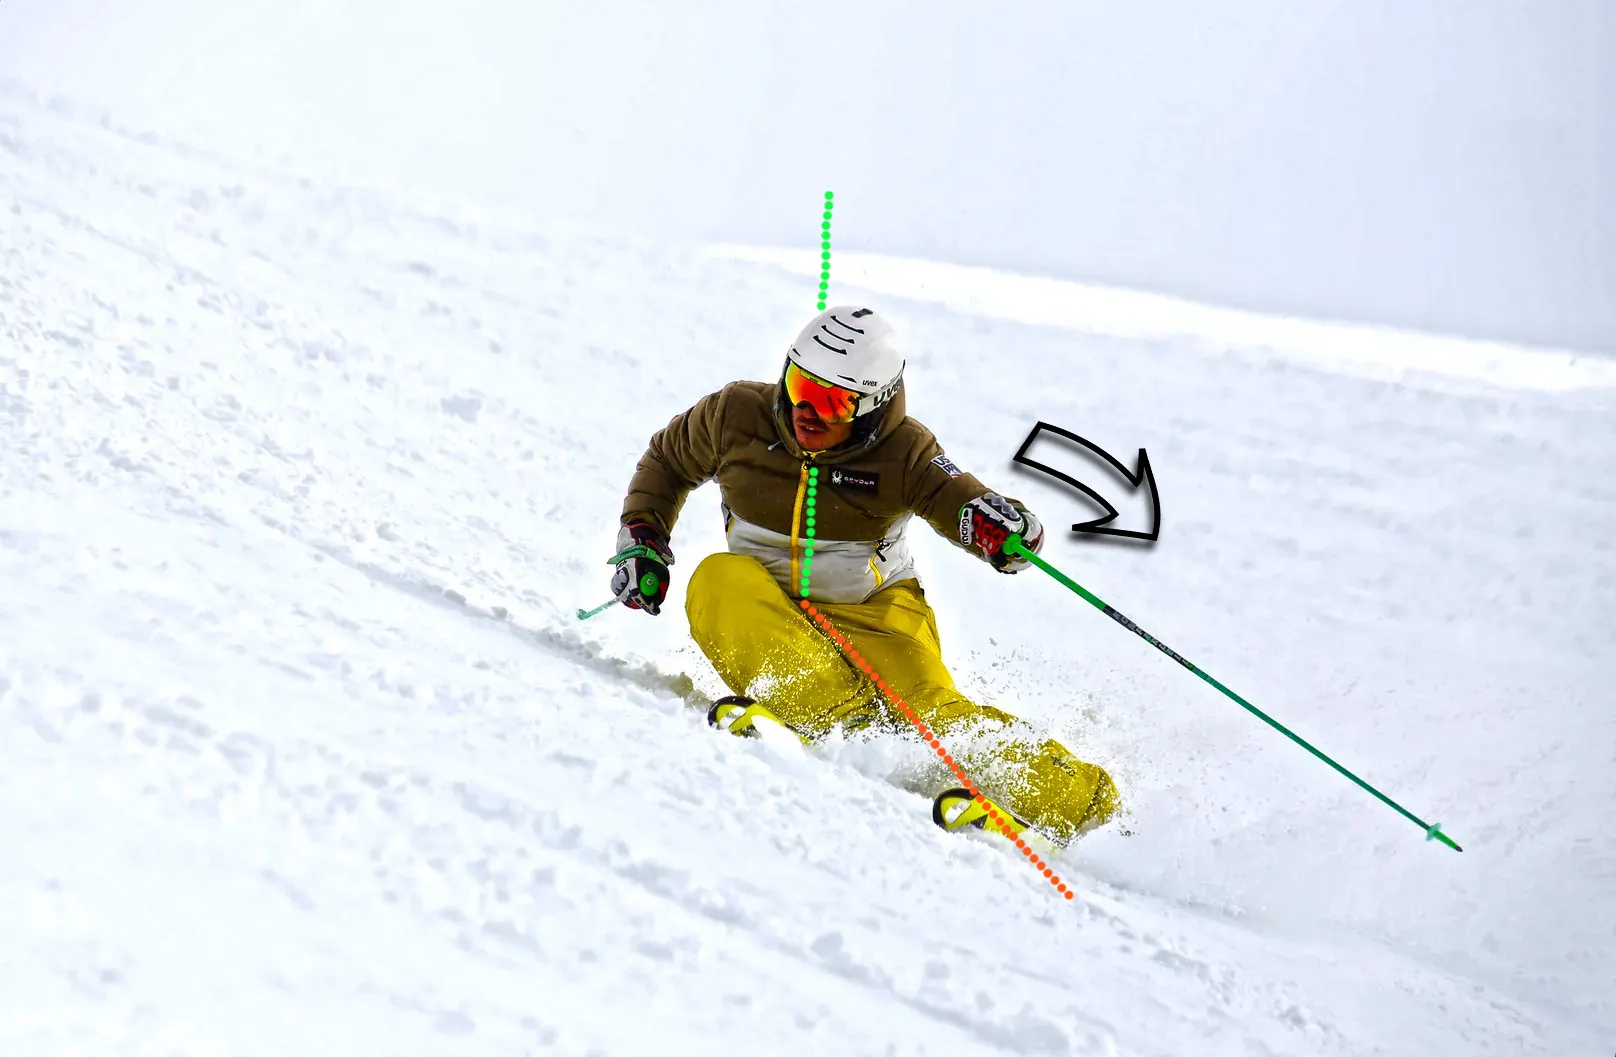 Skiing Upper body angulation on steeps with lines and arrows